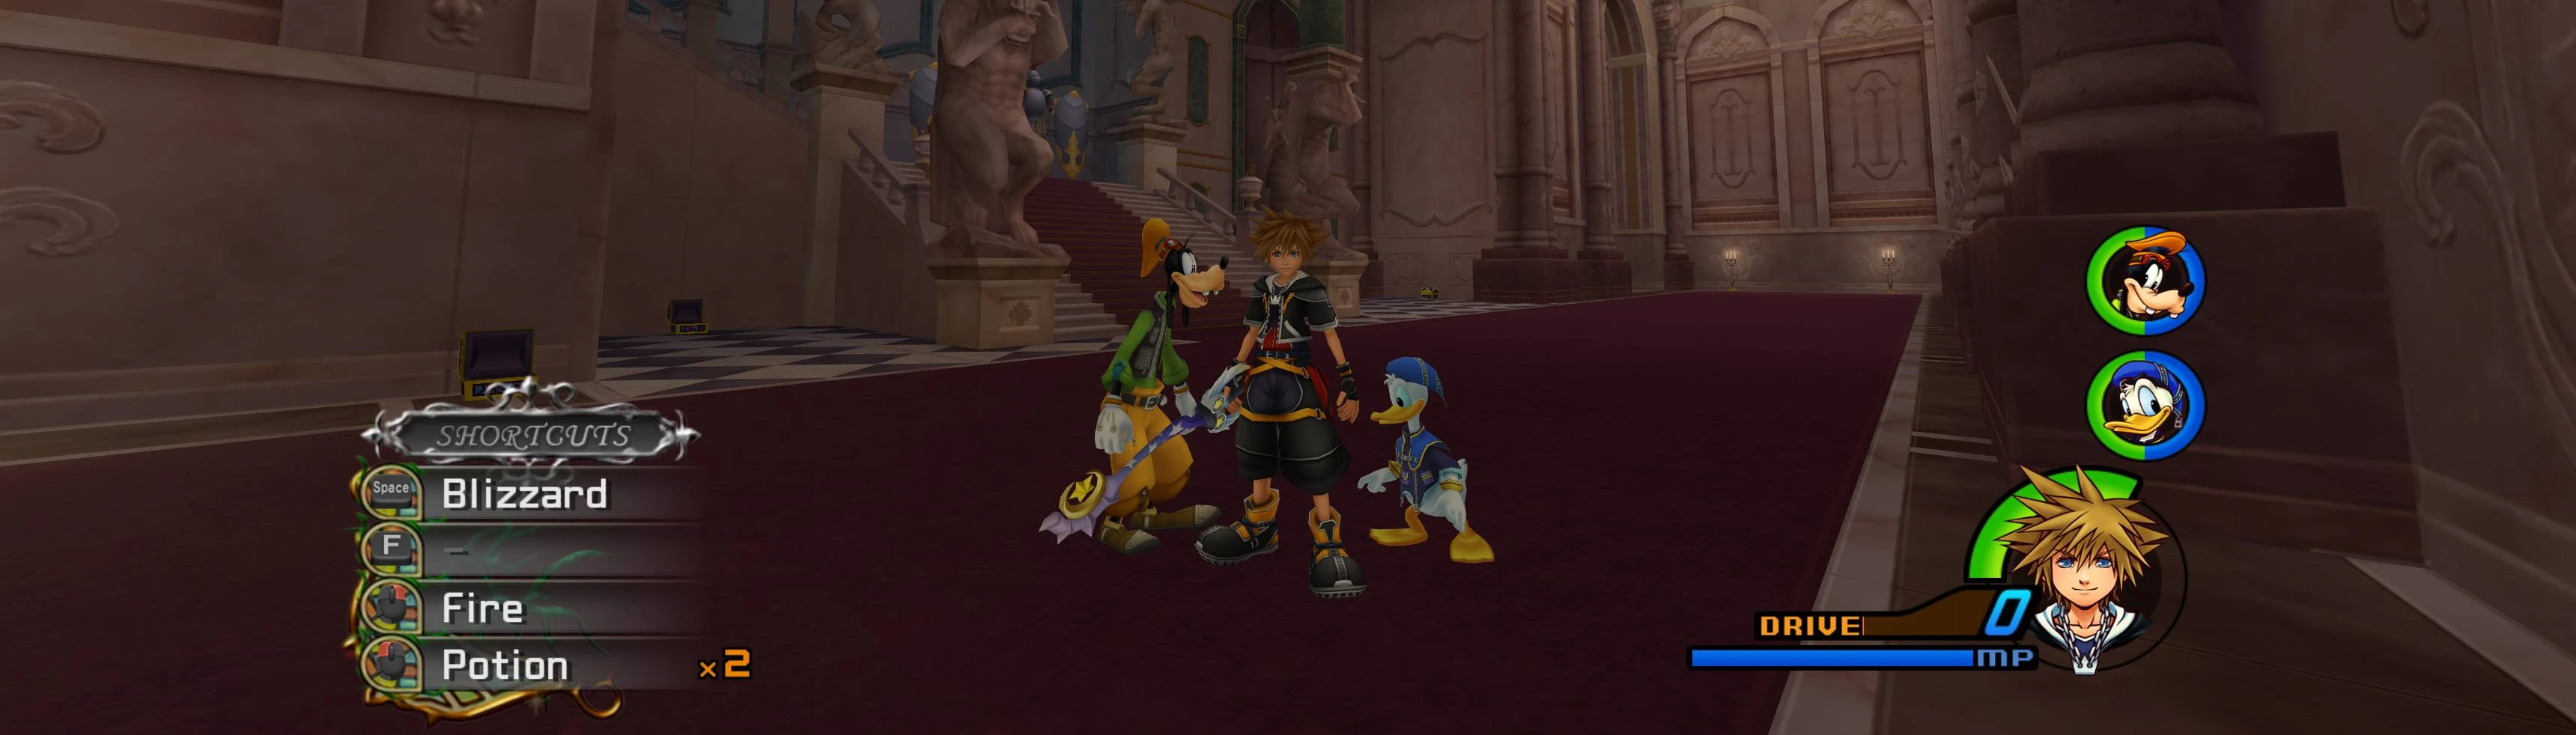 This mod aims to fix the stutters & cutscene FPS issues of Kingdom Hearts 2  PC